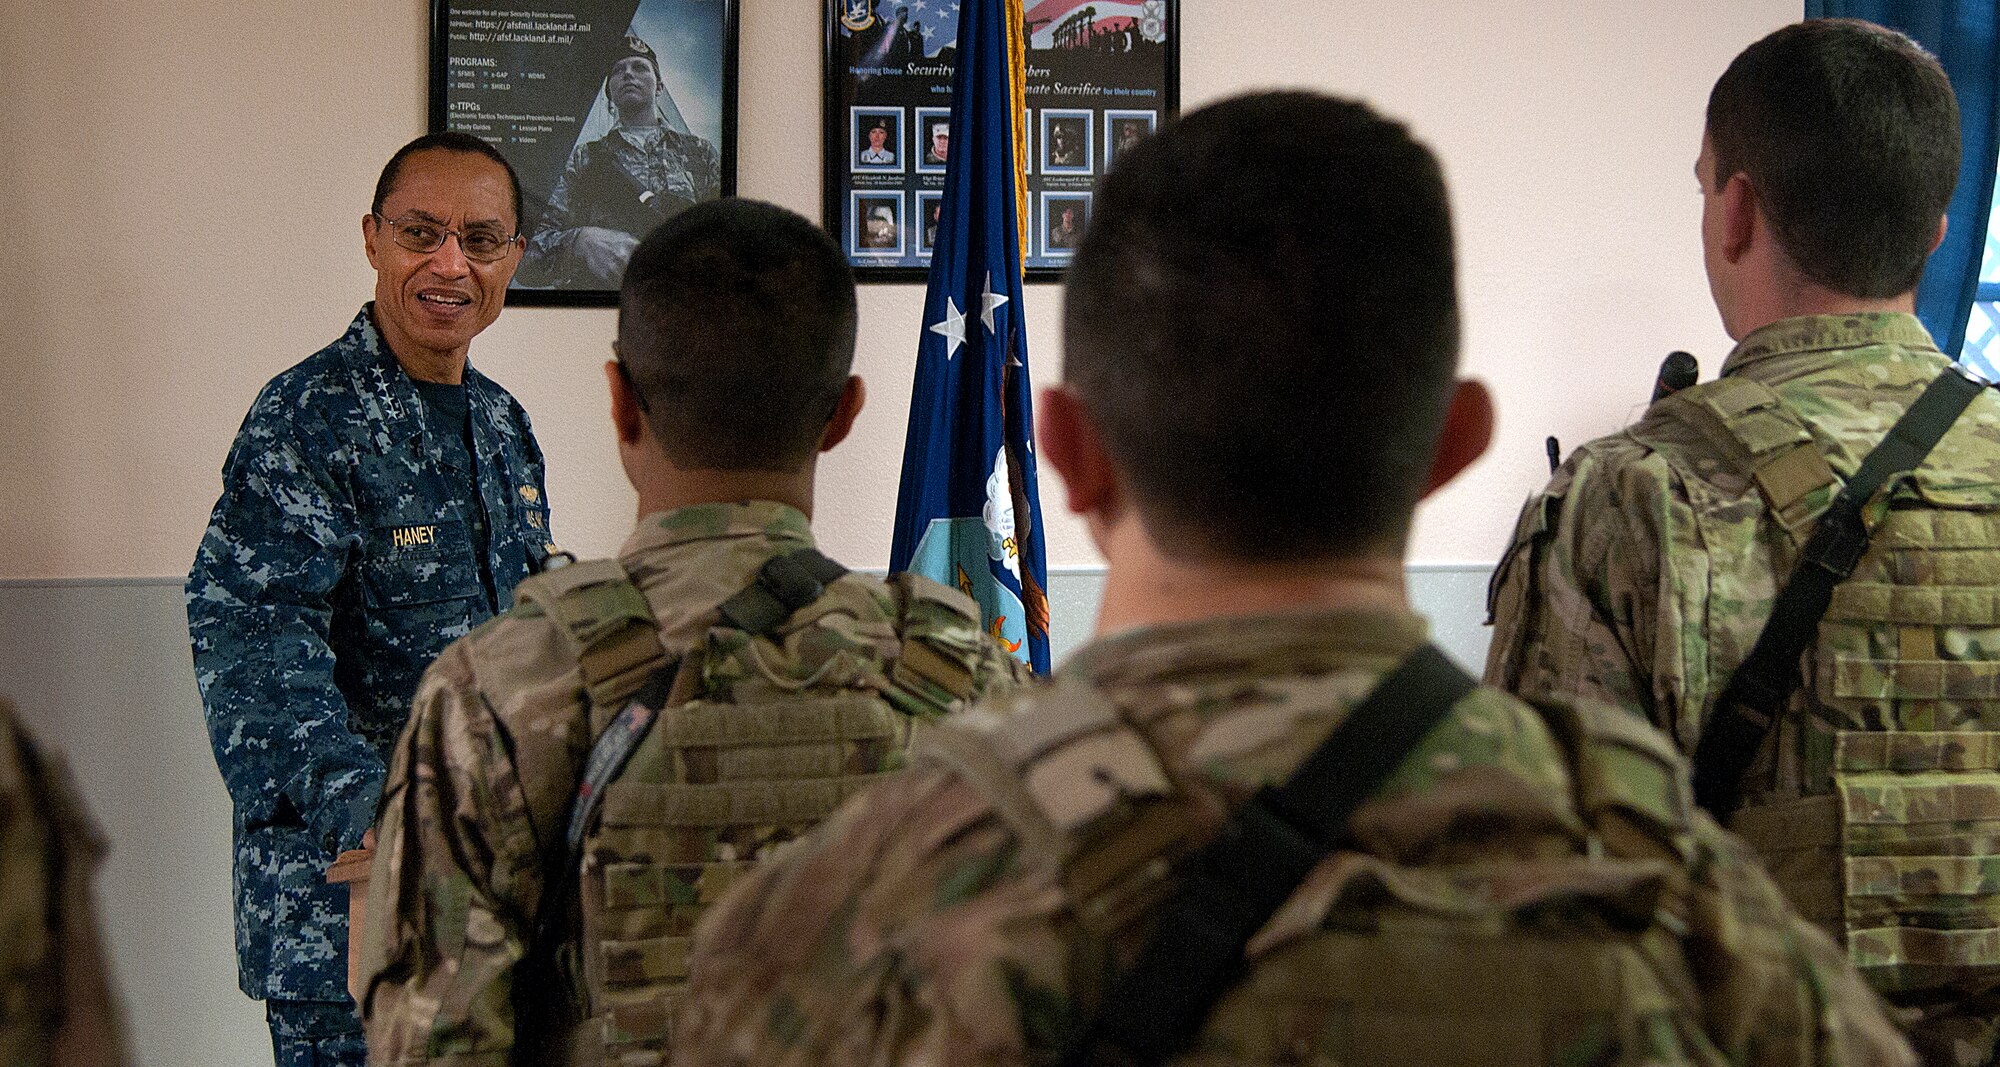 U.S. Navy Adm. Cecil D. Haney, U.S. Strategic Command commander, speaks to 90th Missile Security Forces Squadron Airmen about the importance of their mission April 28, 2015, during a visit to F.E. Warren Air Force Base, Wyo. Haney traveled to F.E. Warren to see firsthand the men and women performing the ICBM mission 24/7, 365, and to chair the Intercontinental Ballistic Missile Stakeholders meeting, one of several such meetings that will be held this year. USSTRATCOM is one of nine DoD unified combatant commands and is charged with strategic deterrence; space operations; cyberspace operations; joint electronic warfare; global strike; missile defense; intelligence, surveillance and reconnaissance; combating weapons of mass destruction; and analysis and targeting. (U.S. Air Force photo by Airman 1st Class Brandon Valle)